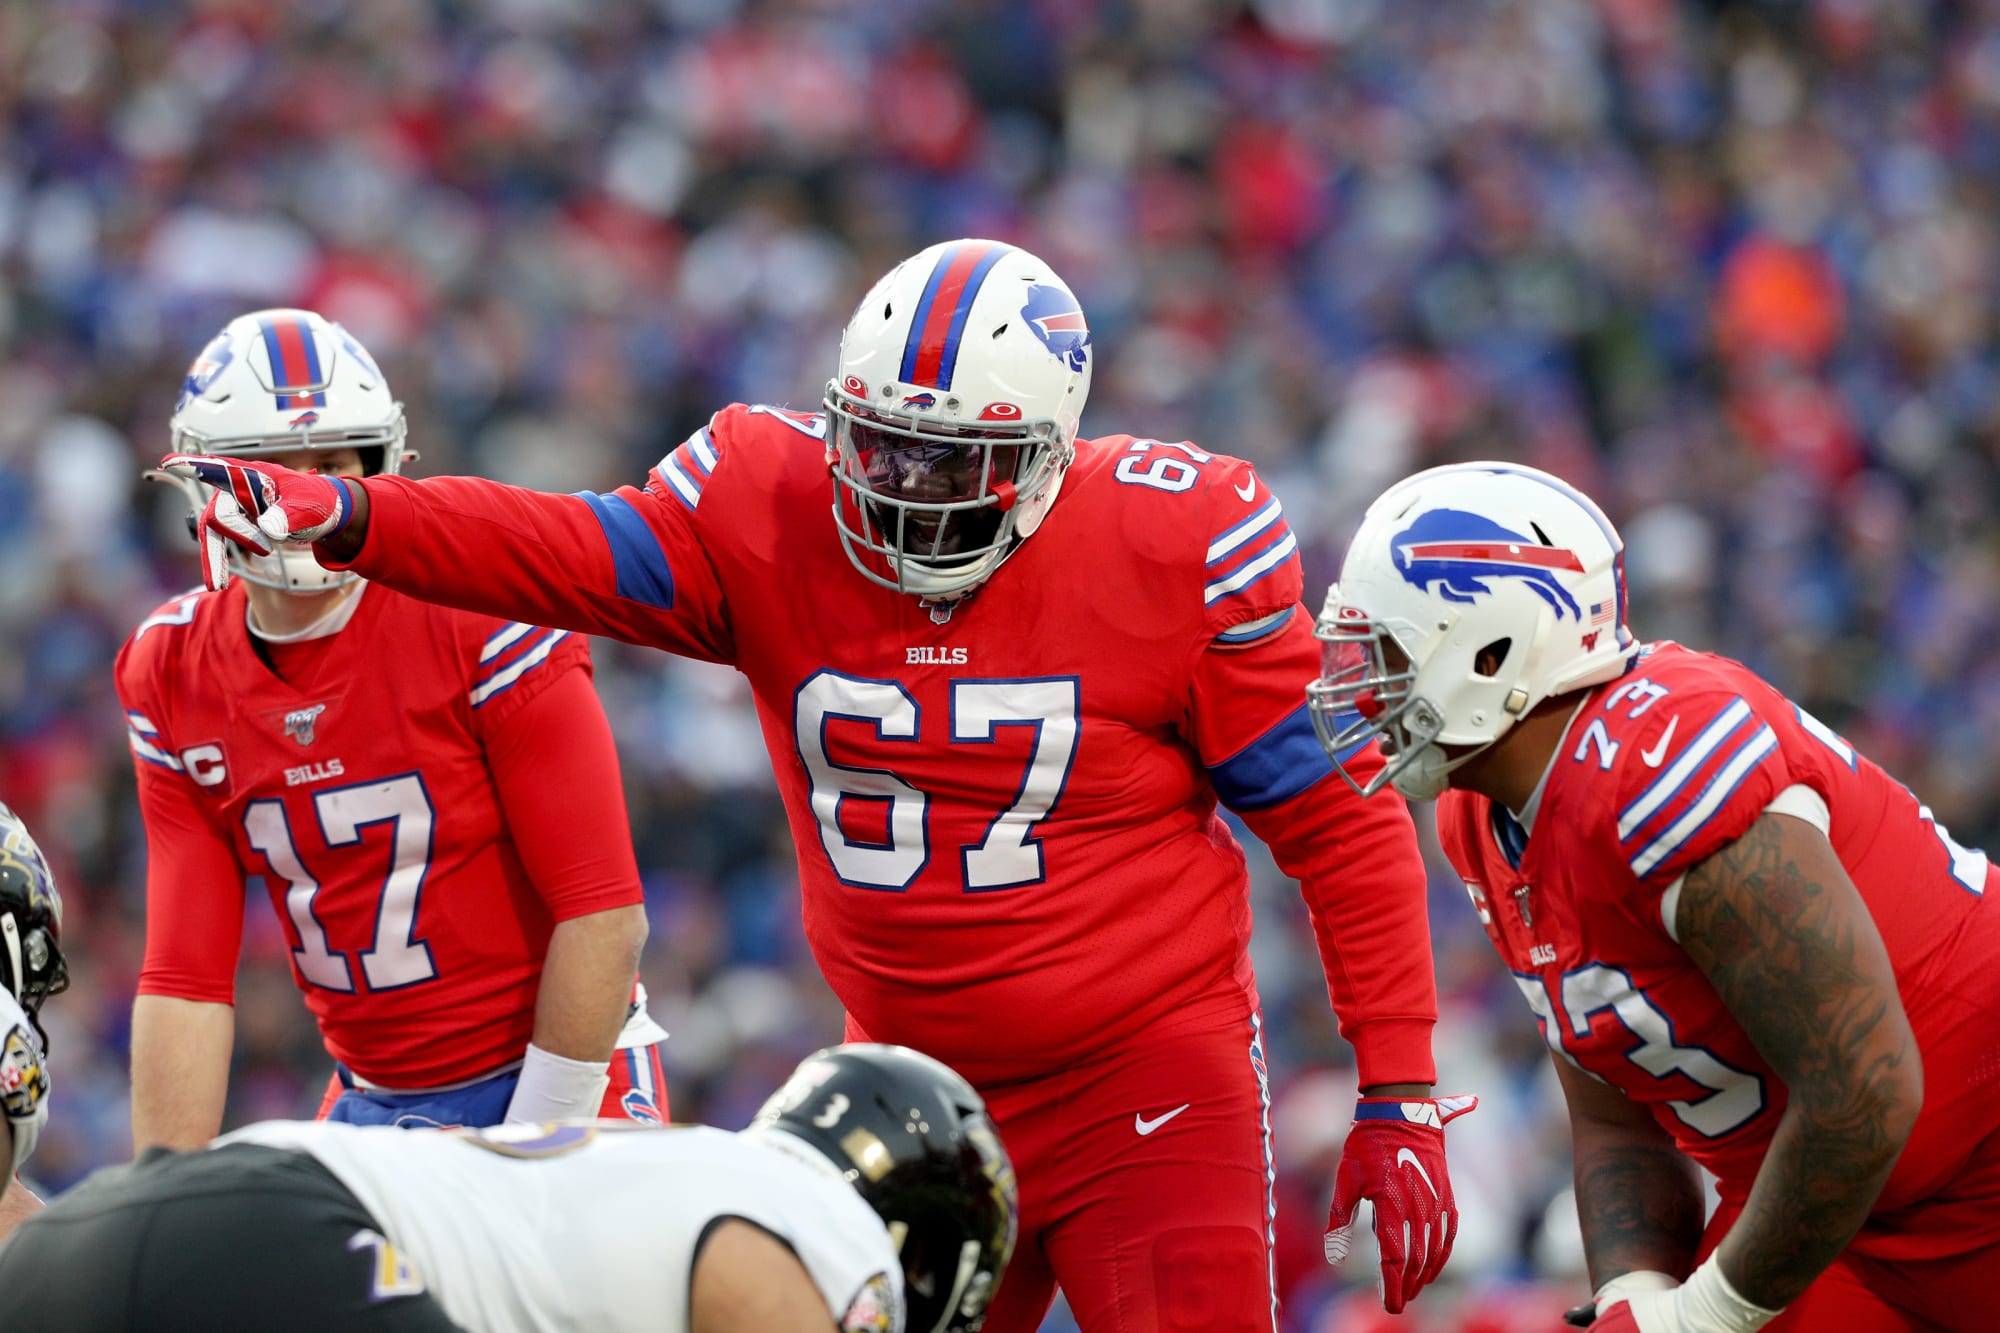 Buffalo Bills 3 questions for the offensive line entering training camp